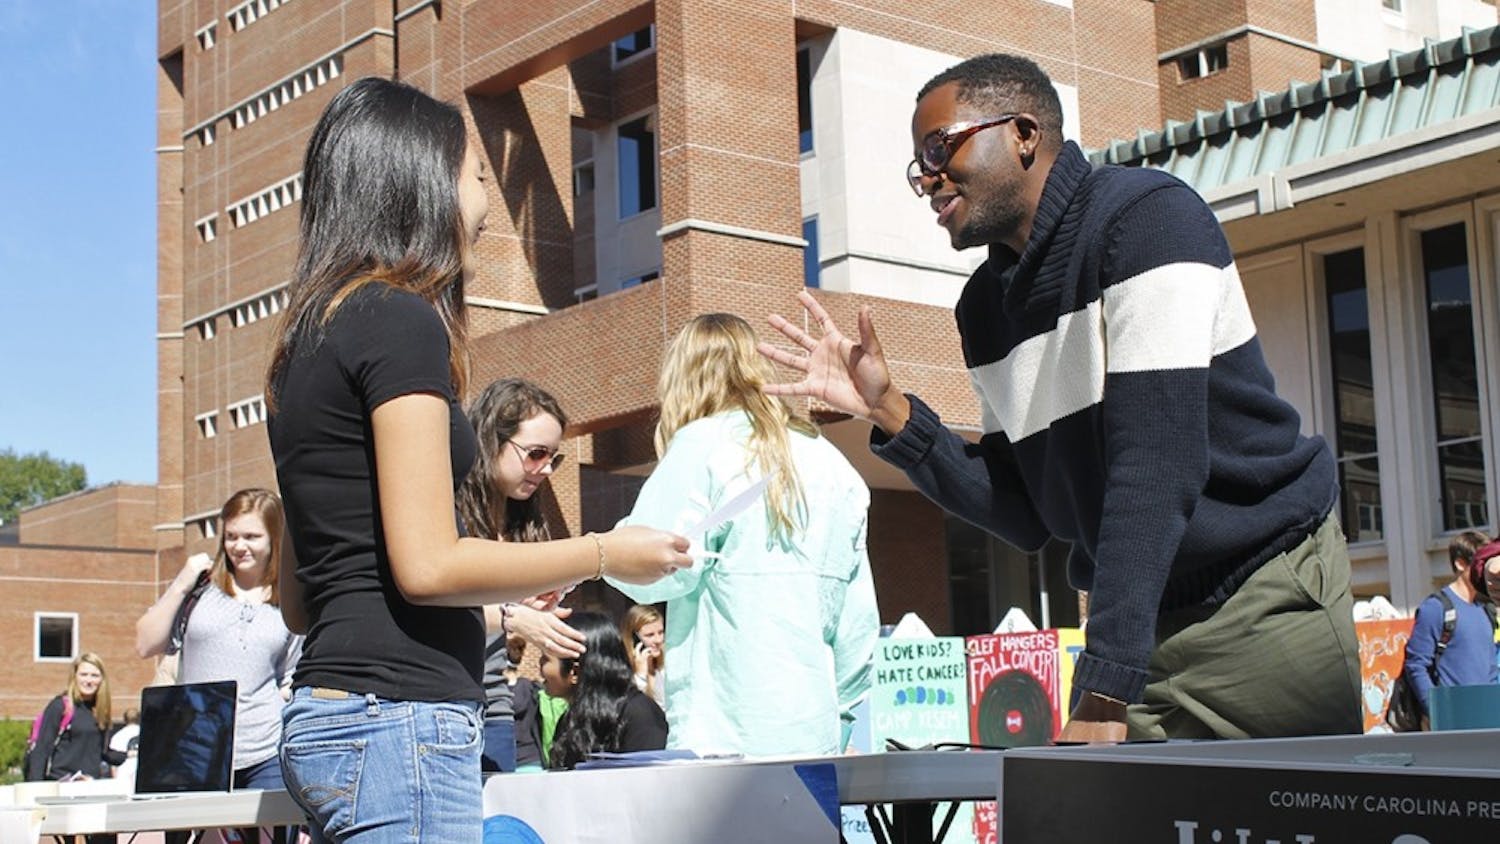 Roderick Gladney (right), founder and chairman of Carolina Cupboard, an organization that provides free food to the UNC campus community, helps recruit new members in the Pit in October 2014. DTH file photo by Johanna Ferebee.